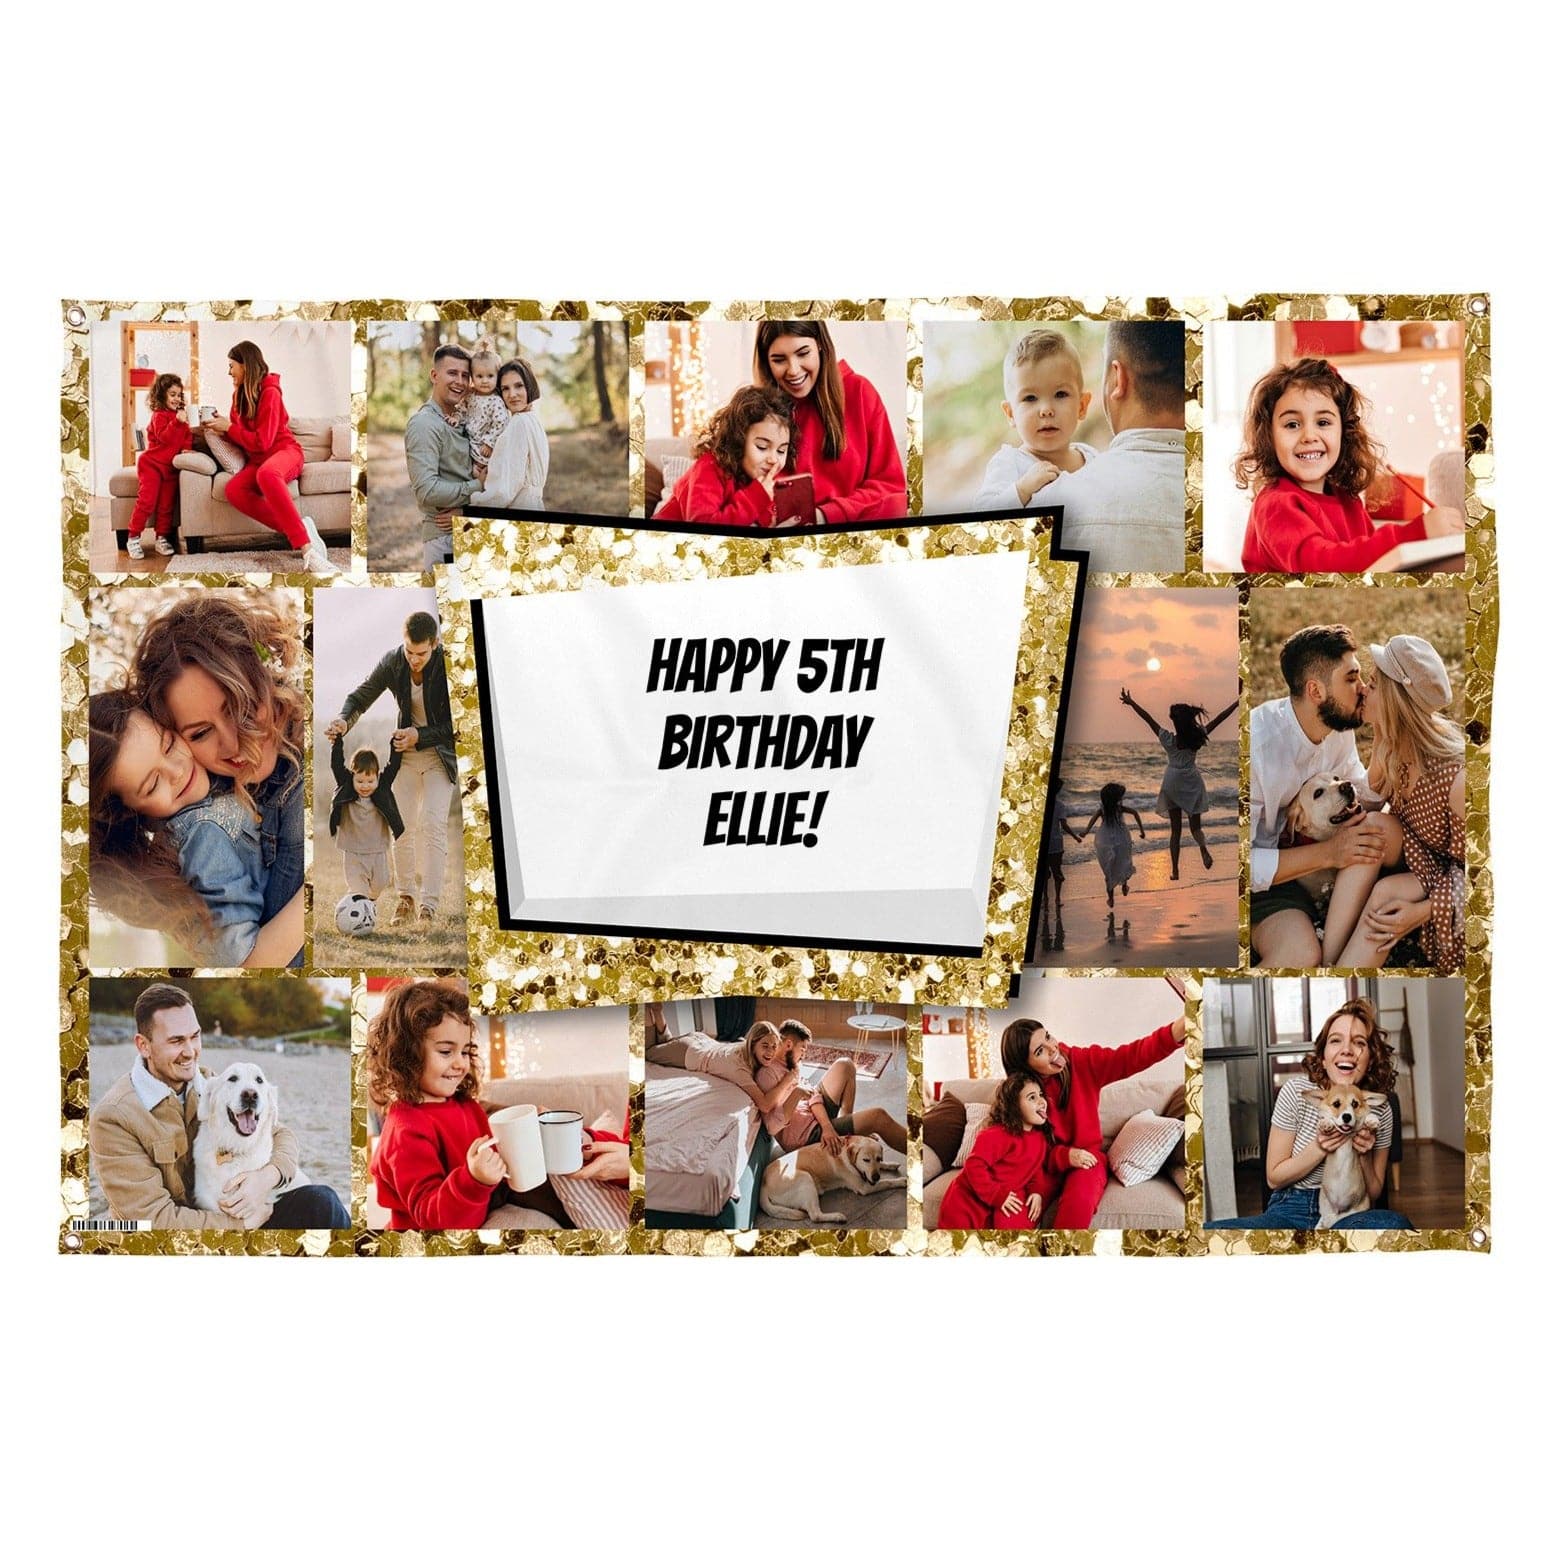 Any Occasion Photo Banner - Gold Glitter - Edit Text - 5FT X 3FTAny Occasion Photo Banner - Gold Glitter - Edit Text - 5FT X 3FT